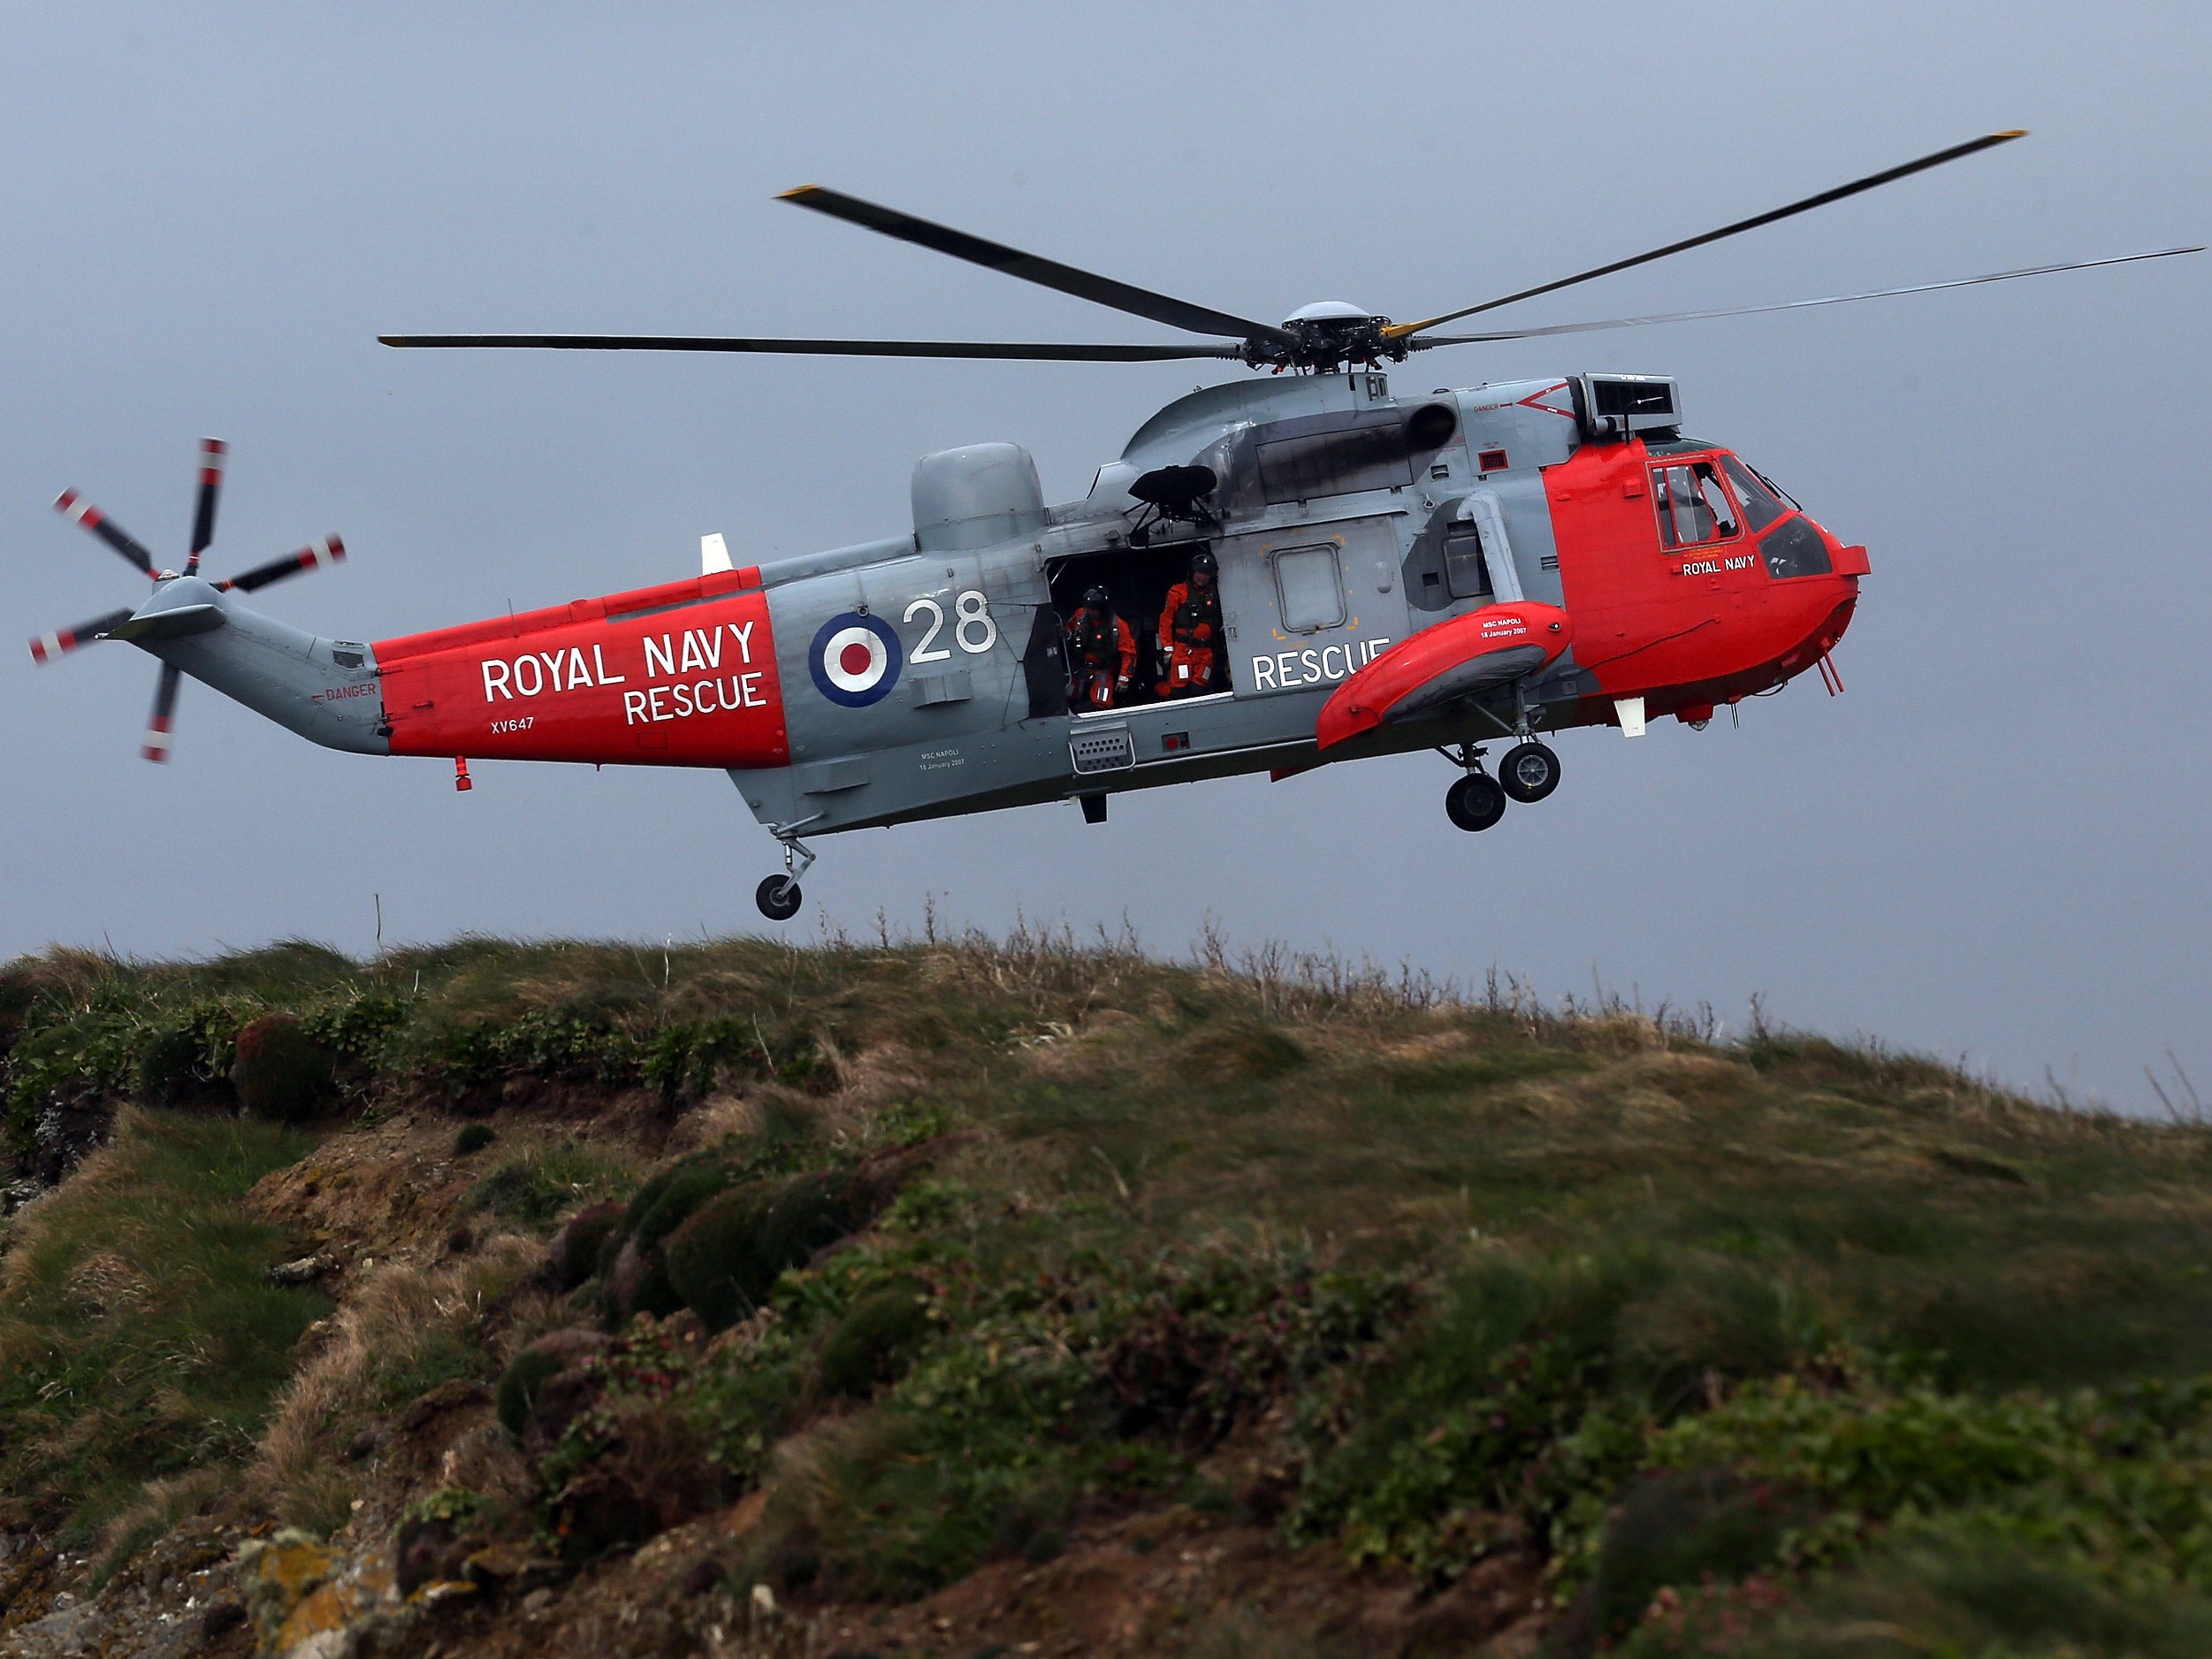 The coastguard and RAF helped find the missing plane